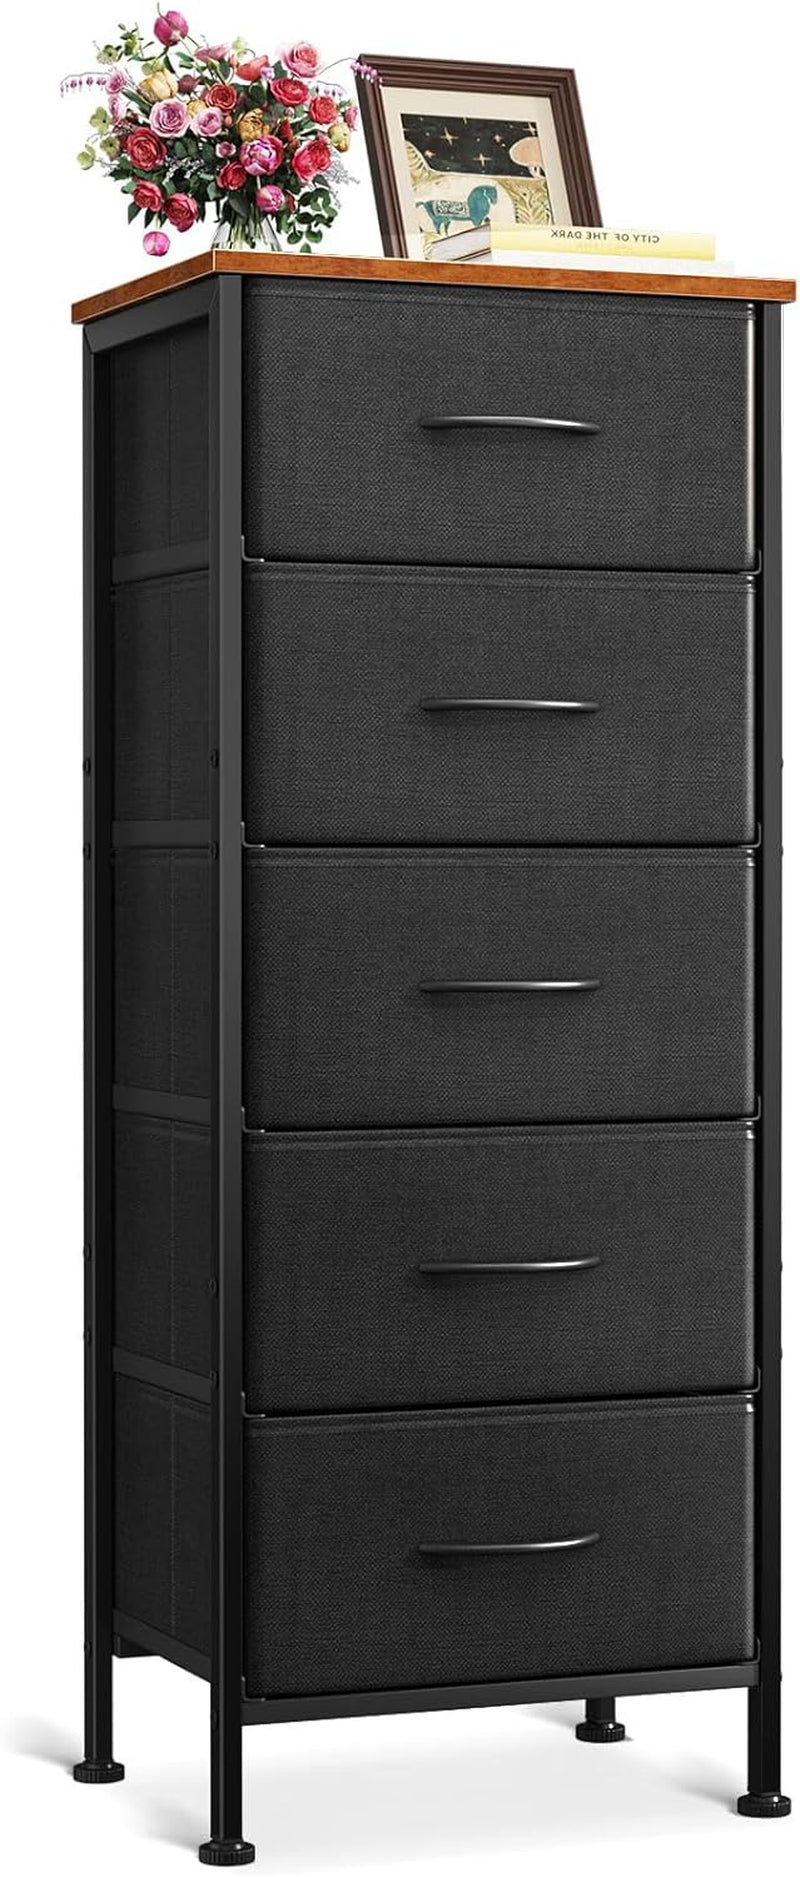 AODK Dresser for Bedroom with 5 Storage Drawers, 48" Tall Dresser Chest of Drawers Fabric Dresser with Sturdy Steel Frame, Black